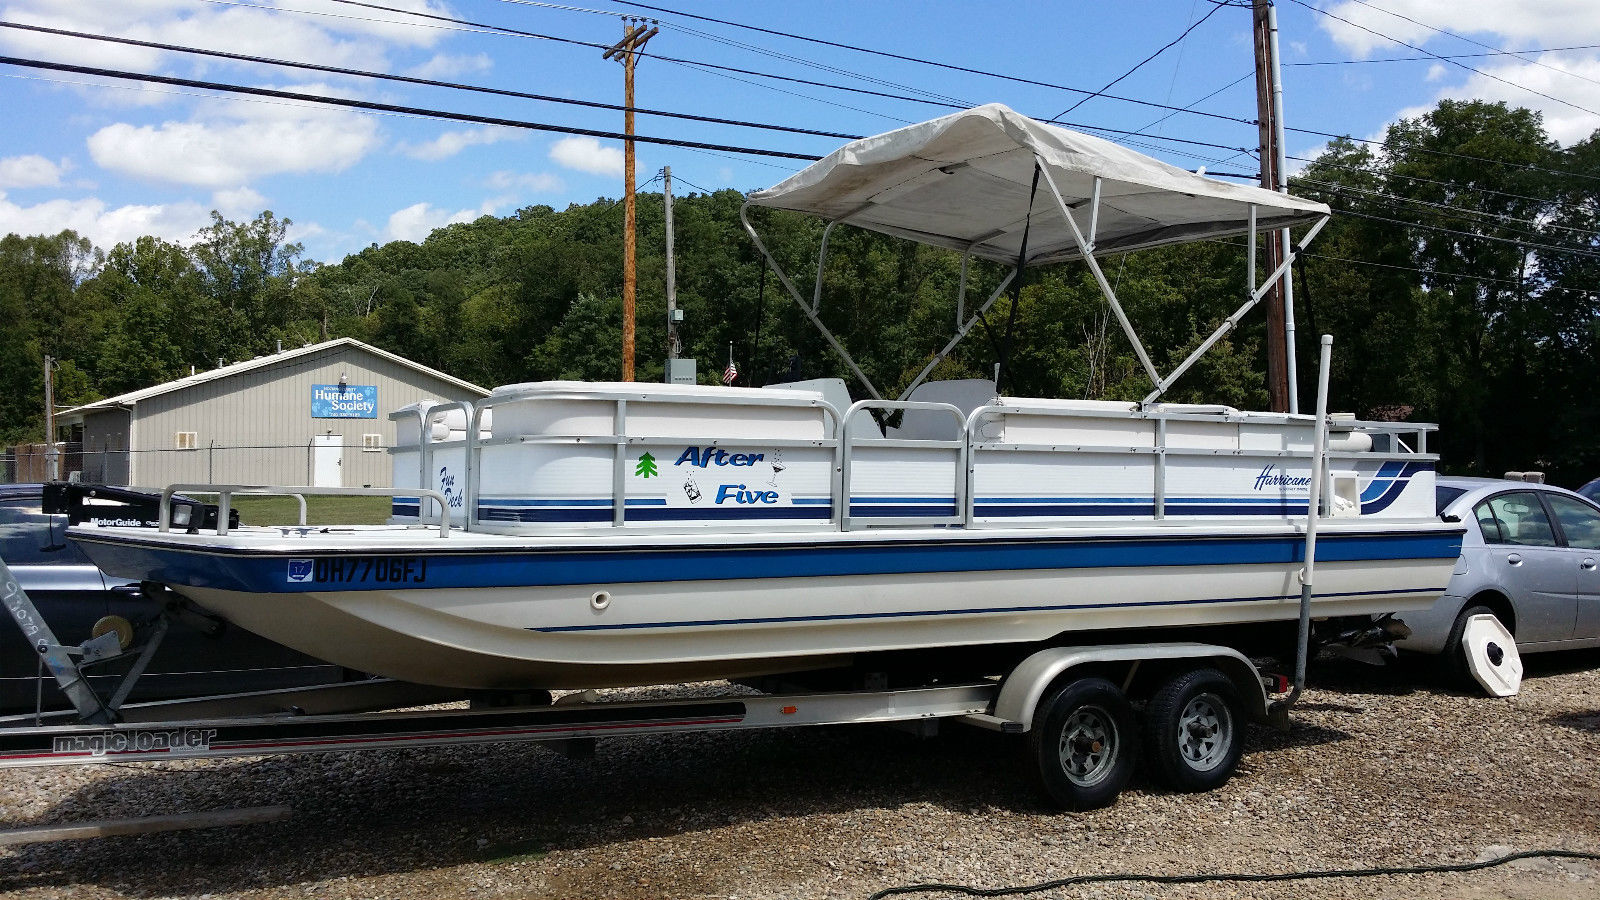 Hurricane Fun Deck 22-23 Ft 1994 for sale for $5,250 